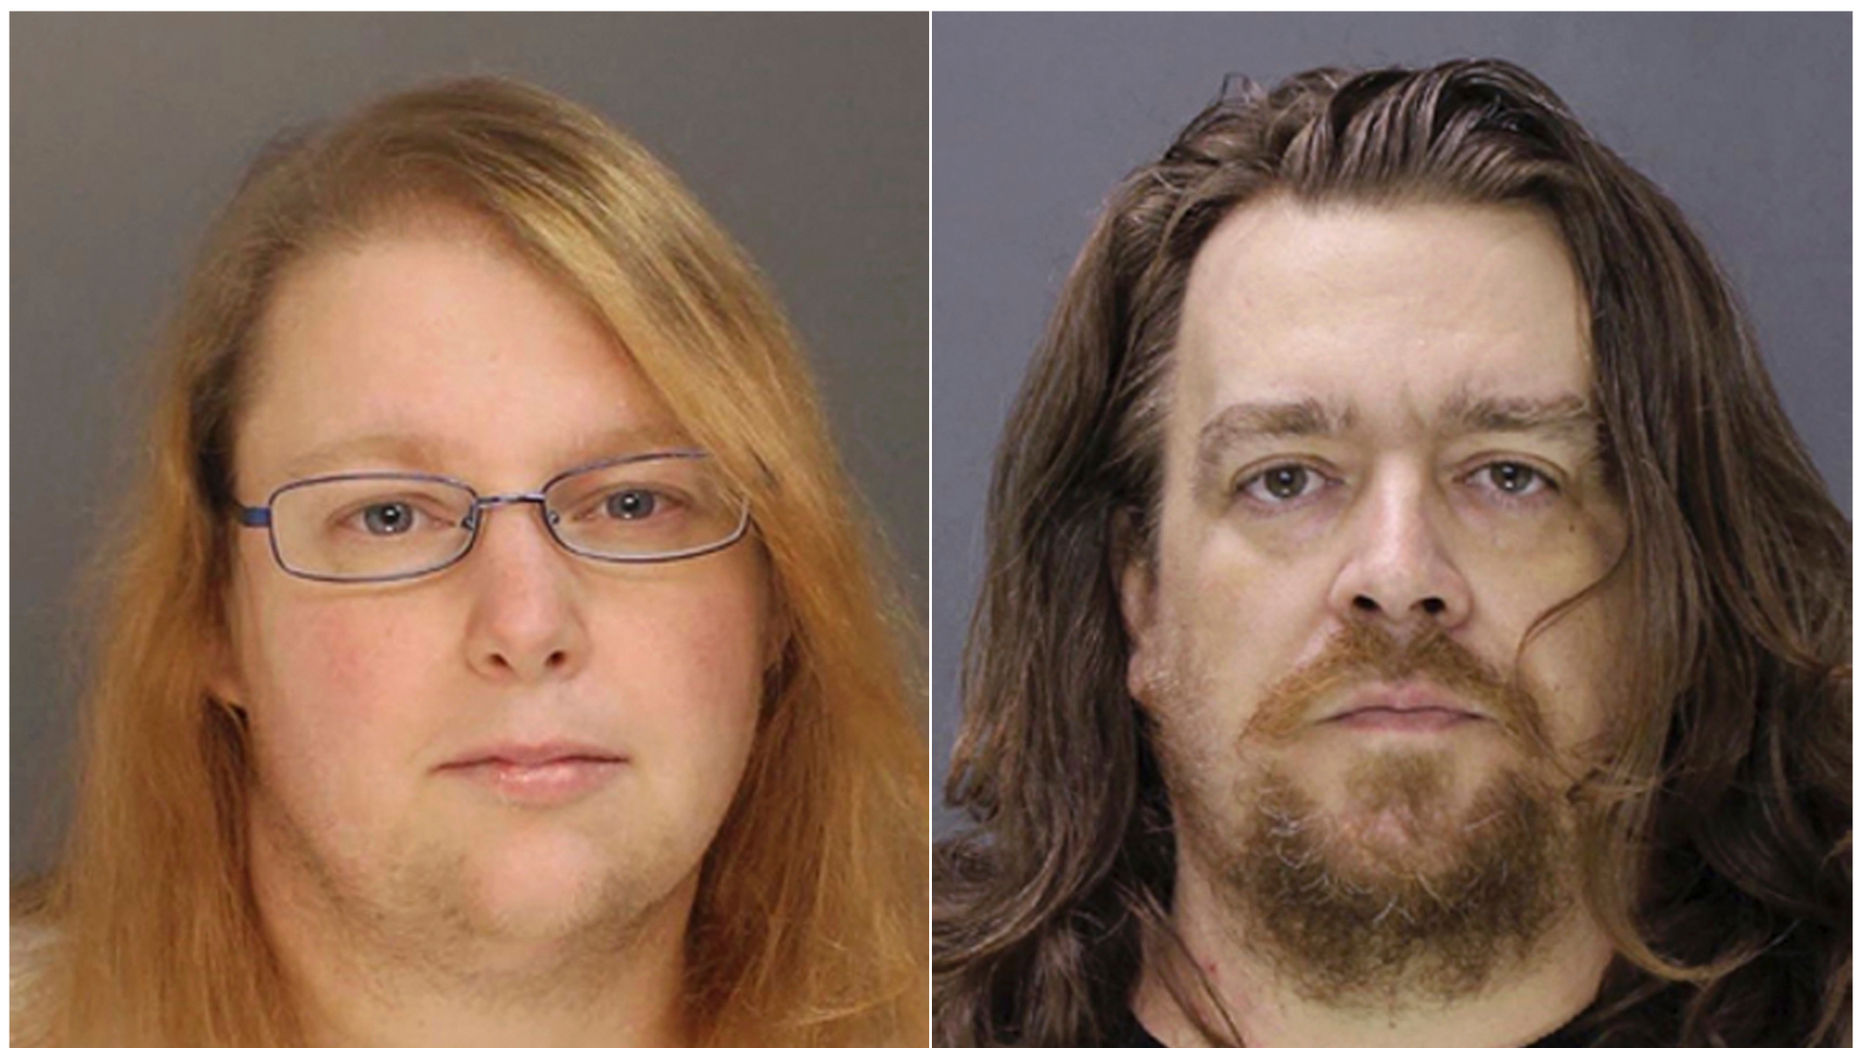 DOSSIER - This combination of file photos provided on Sunday, January 8, 2017 by Bucks County Attorney shows Sara Packer, left, and Jacob Sullivan. Sullivan pleaded guilty on Tuesday, February 19, 2019, to the death sentence for the first-degree murder of the 14-year-old Grace Packer. Sullivan pleaded guilty to all charges in the death of Grace Packer in 2016. The sanction phase of her trial opens on Friday, March 15, 2019 outside Philadelphia. A jury will hear evidence of Sullivan's crimes before deciding on a life sentence or death sentence. (Bucks County Attorney via AP, File)